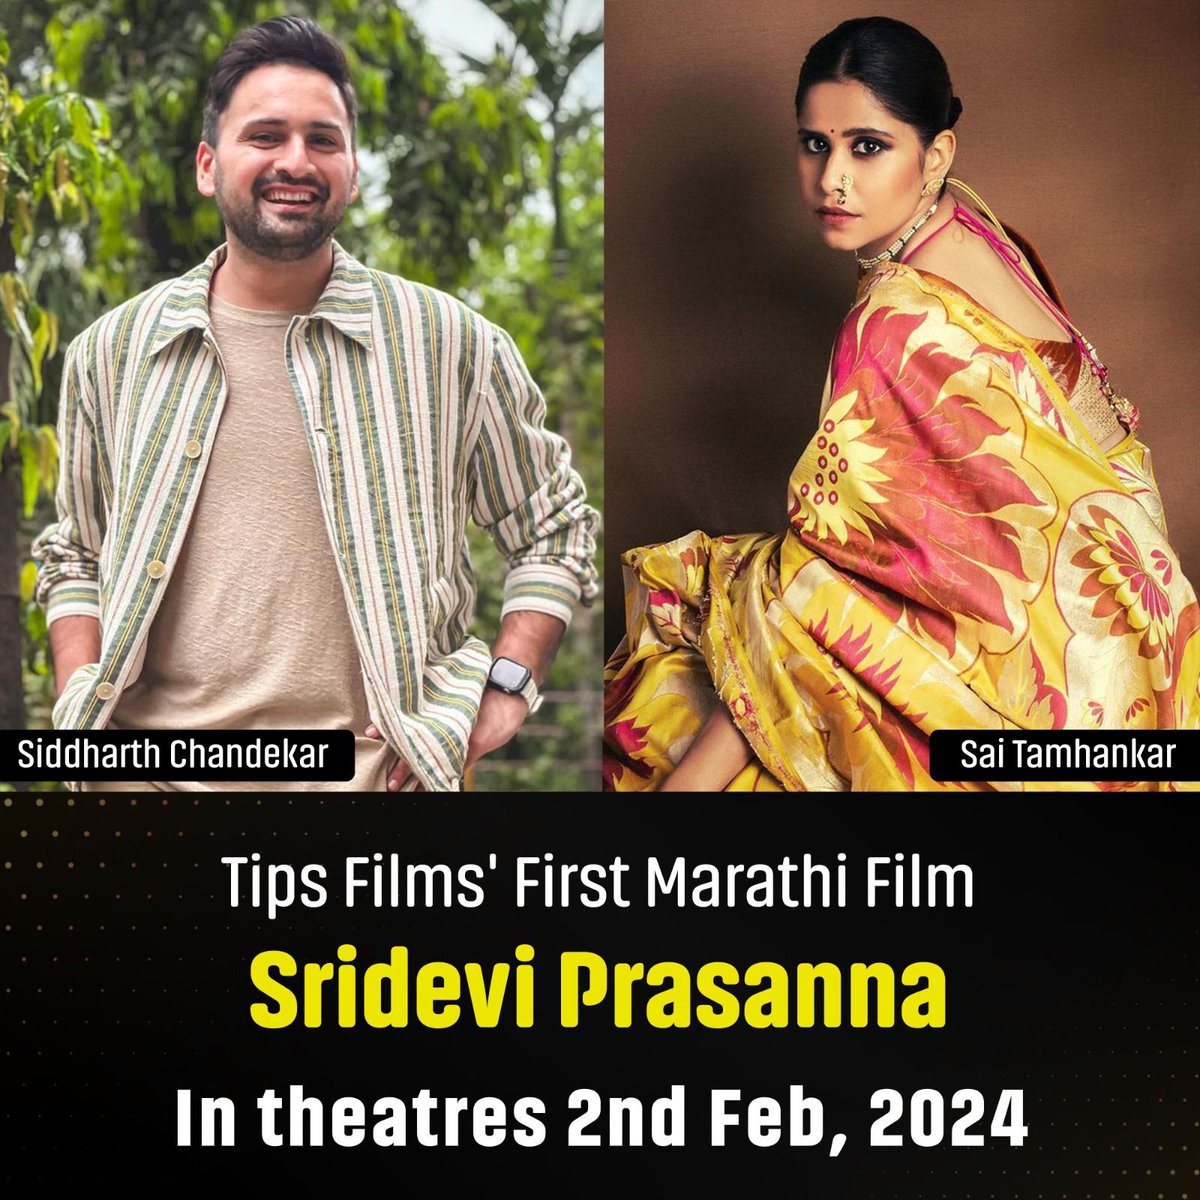 Tips Films Ltd.’s 1st Marathi Film #SrideviPrasanna set to release on February 2nd 2024, featuring Sai Tamhankar and Siddharth Chandekar. Initially scheduled for January 5, 2024, Directed by Vishal Modhave & Written by Aditi Moghe.